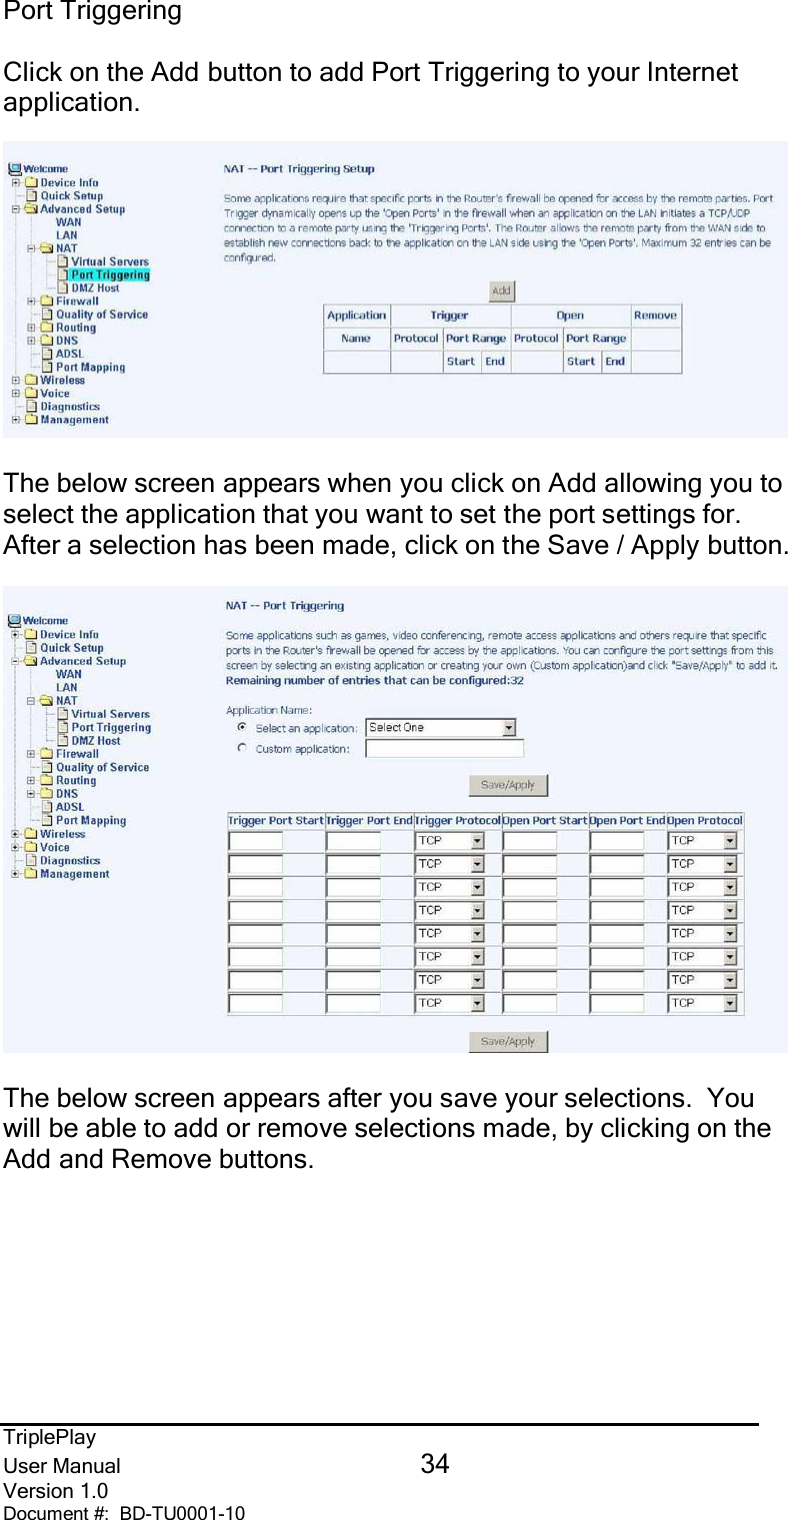 TriplePlayUser Manual 34Version 1.0Document #:  BD-TU0001-10Port TriggeringClick on the Add button to add Port Triggering to your Internetapplication.The below screen appears when you click on Add allowing you toselect the application that you want to set the port settings for.After a selection has been made, click on the Save / Apply button.The below screen appears after you save your selections.  Youwill be able to add or remove selections made, by clicking on theAdd and Remove buttons.